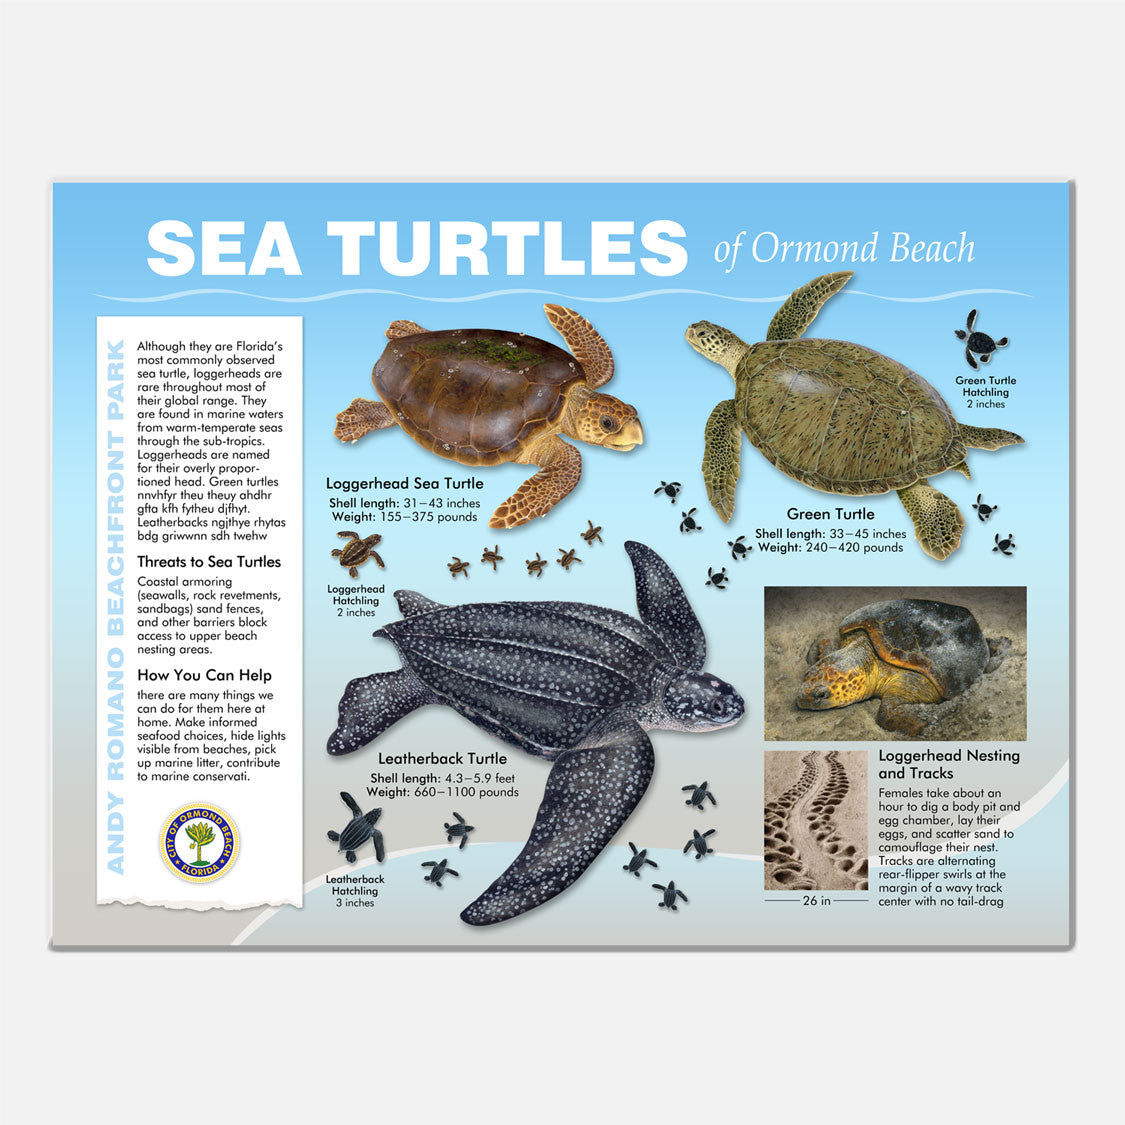 This beautifully illustrated educational display describes and identifies sea turtles that occur at Andy Romano Beachfront Park, Ormond Beach, Florida.